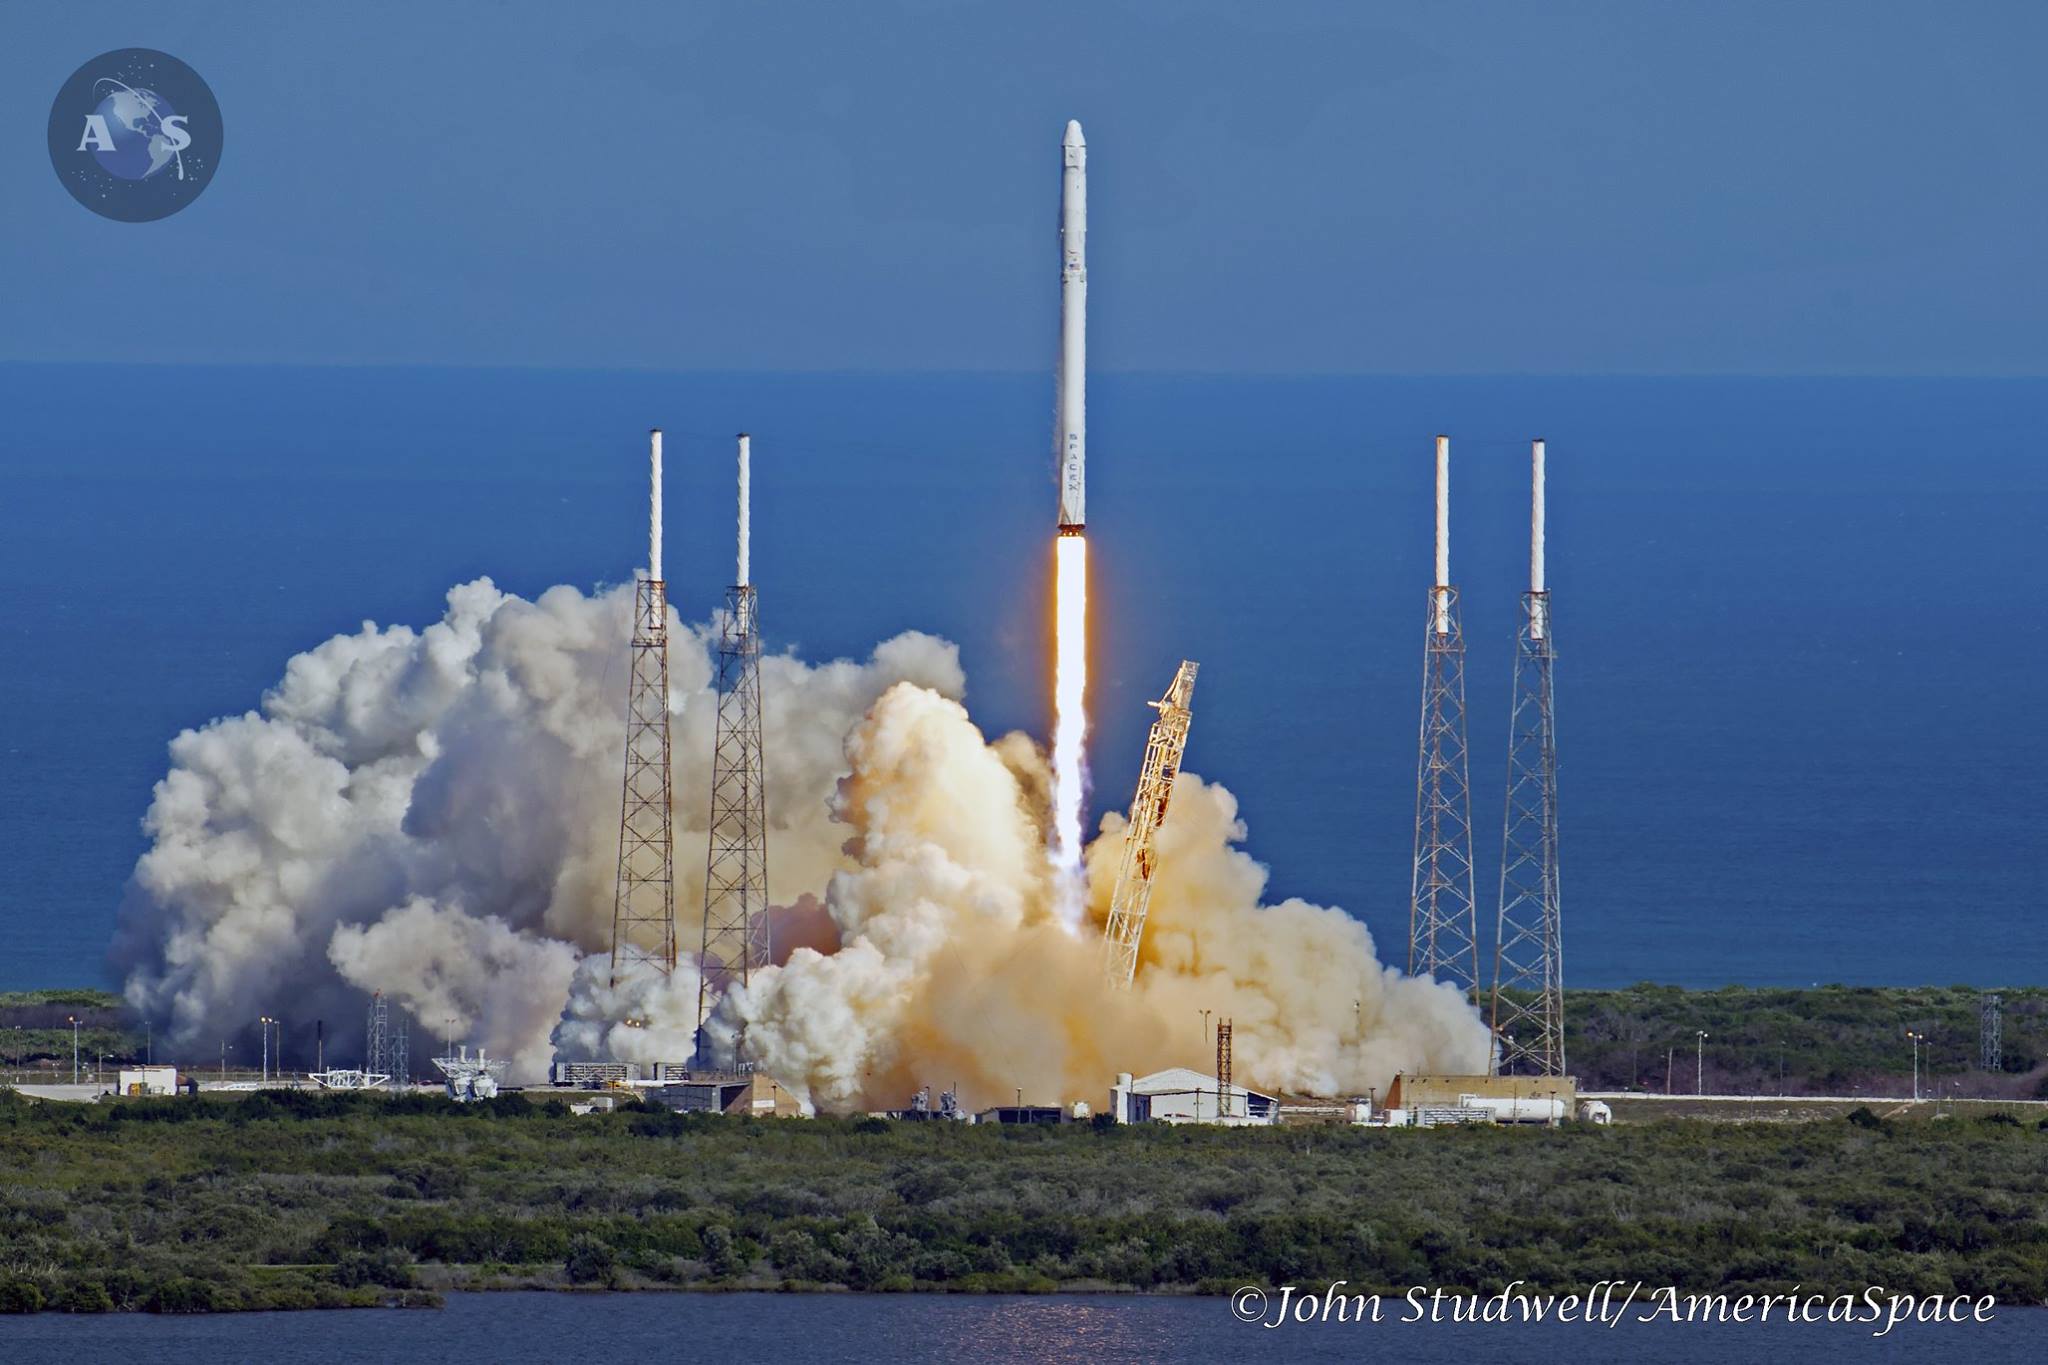 SpaceX's Falcon-9 flew into clear blue skies over Cape Canaveral AFS this afternoon, taking aim with Dragon for the CRS-8 mission to the ISS. The flight marked the first successful offshore barge landing for the company as well, marking the second time SpaceX has achieved a landing after launching from the Cape. Photo Credit: John Studwell / AmericaSpace